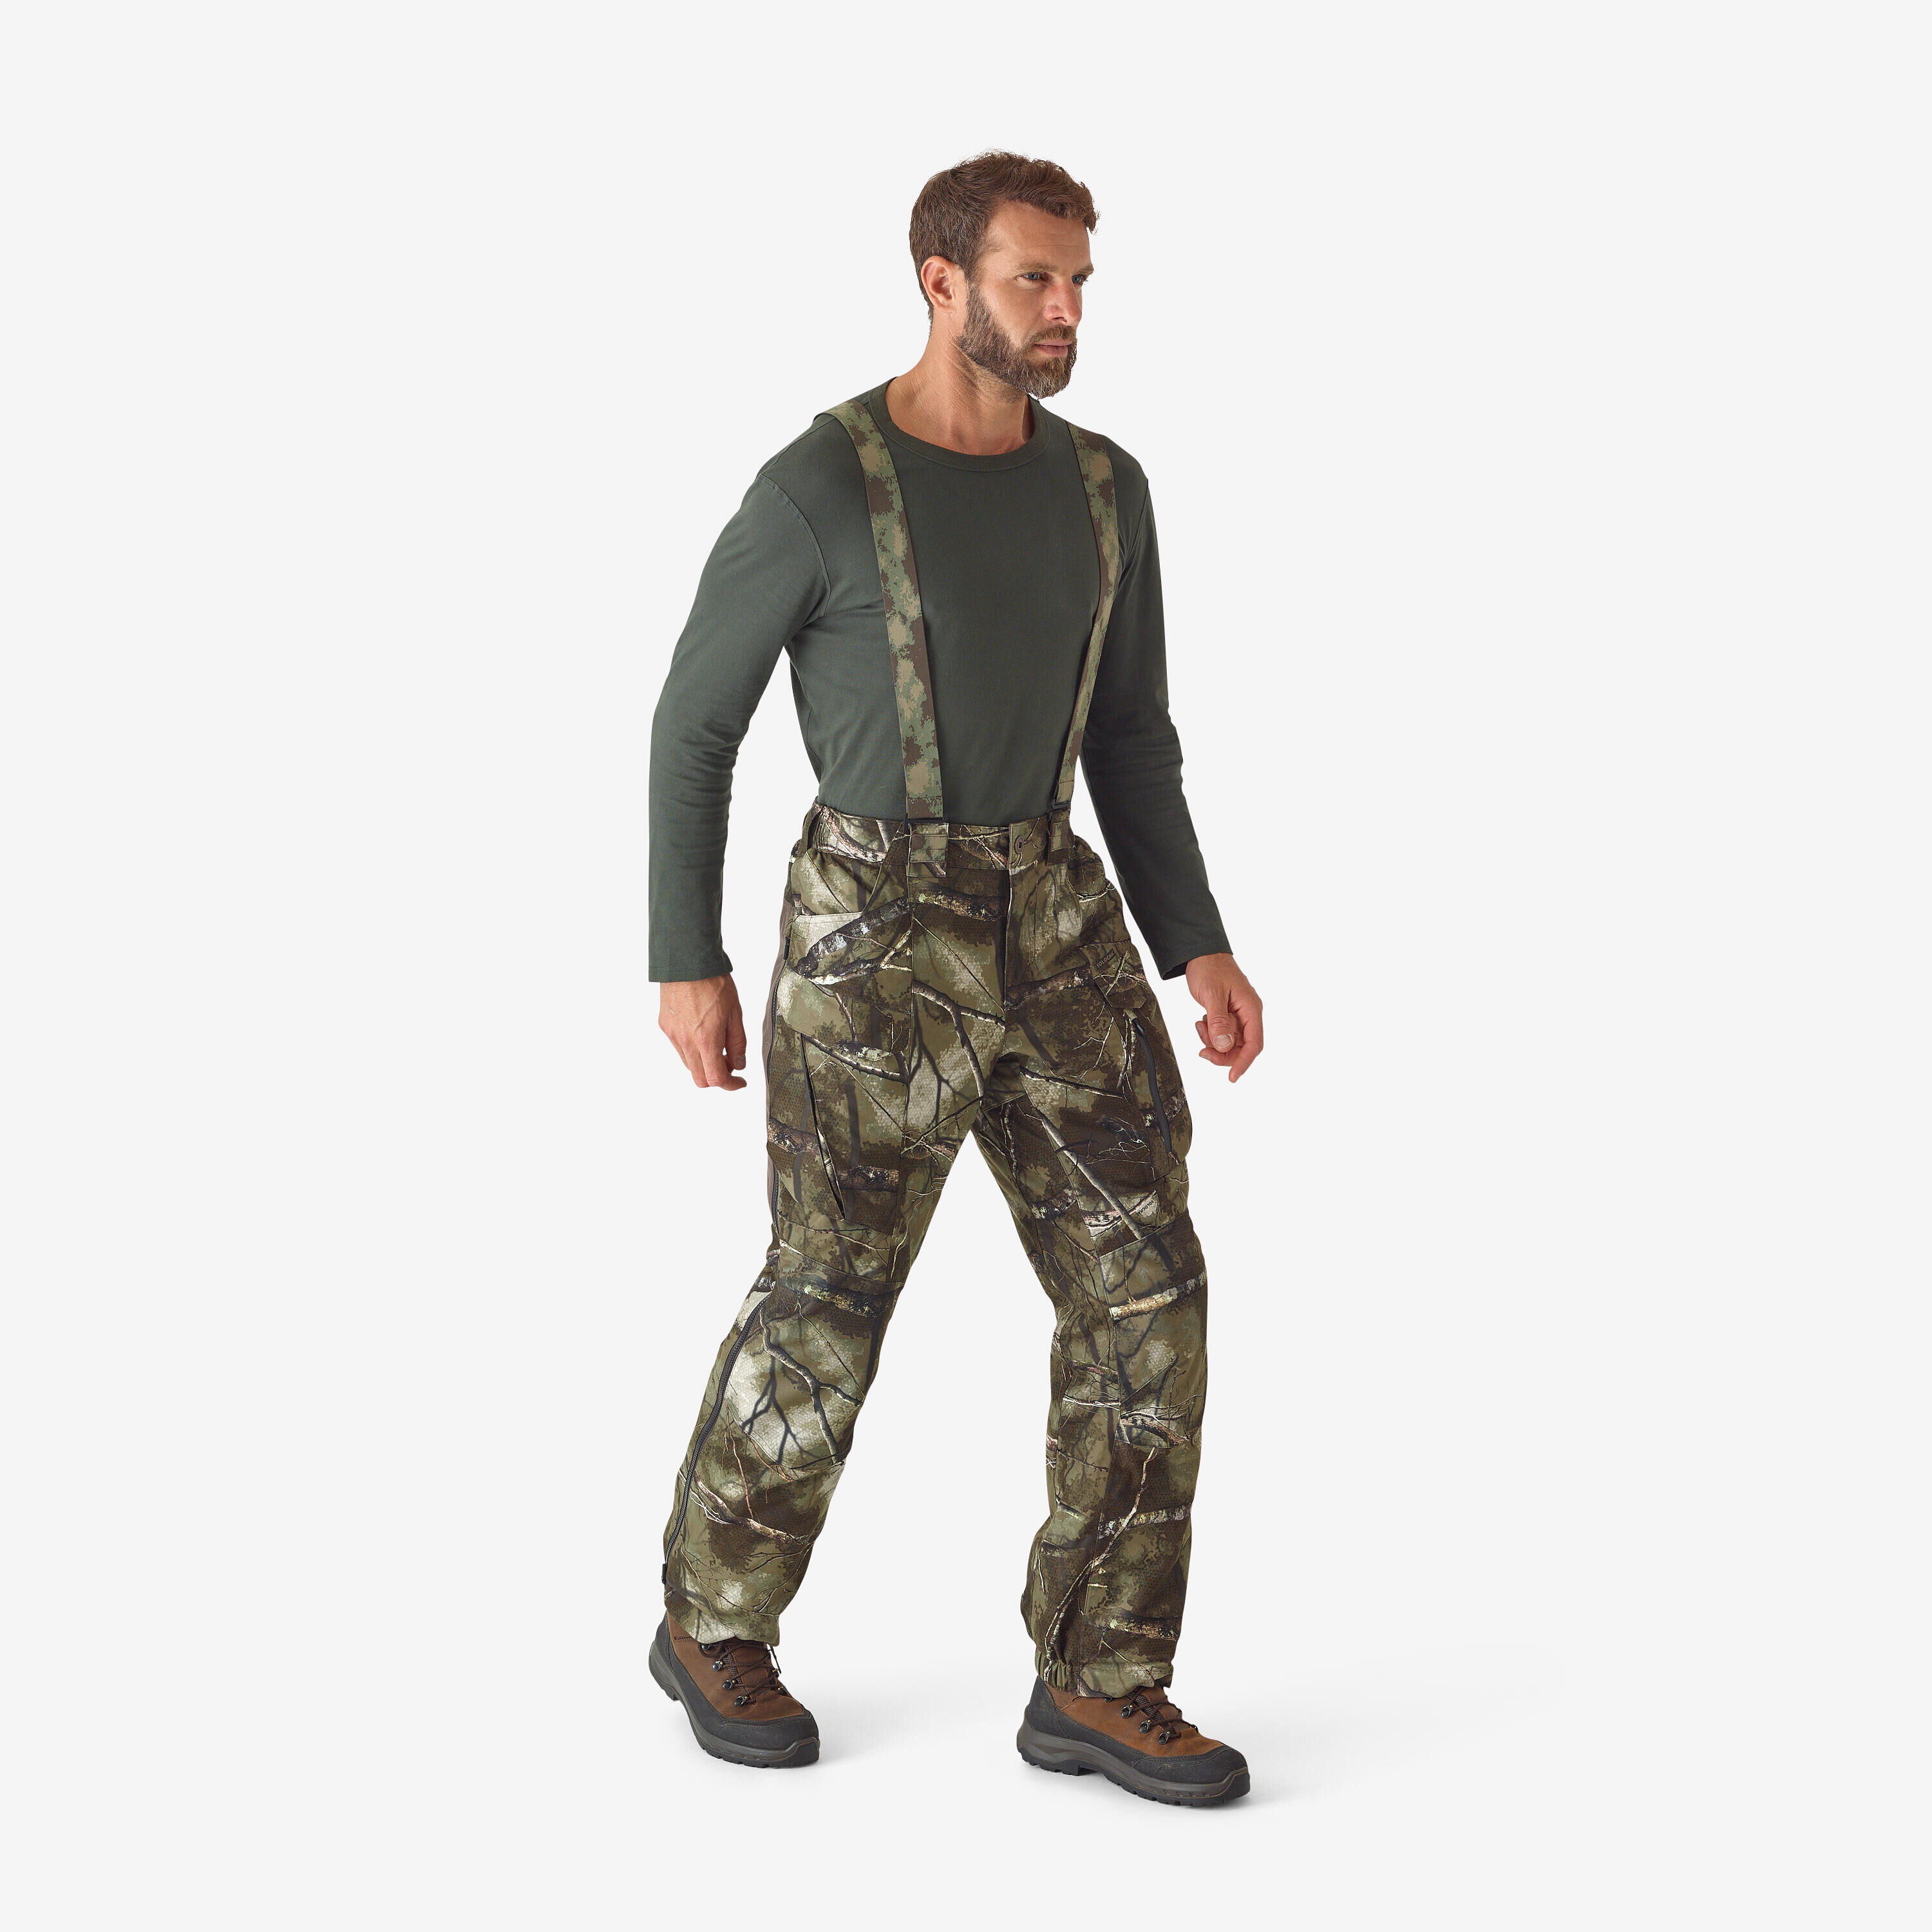 SOLOGNAC TROUSERS WITH STRAPS WARM WATERPROOF AND SILENT 900 TREEMETIC CAMOUFLAGE